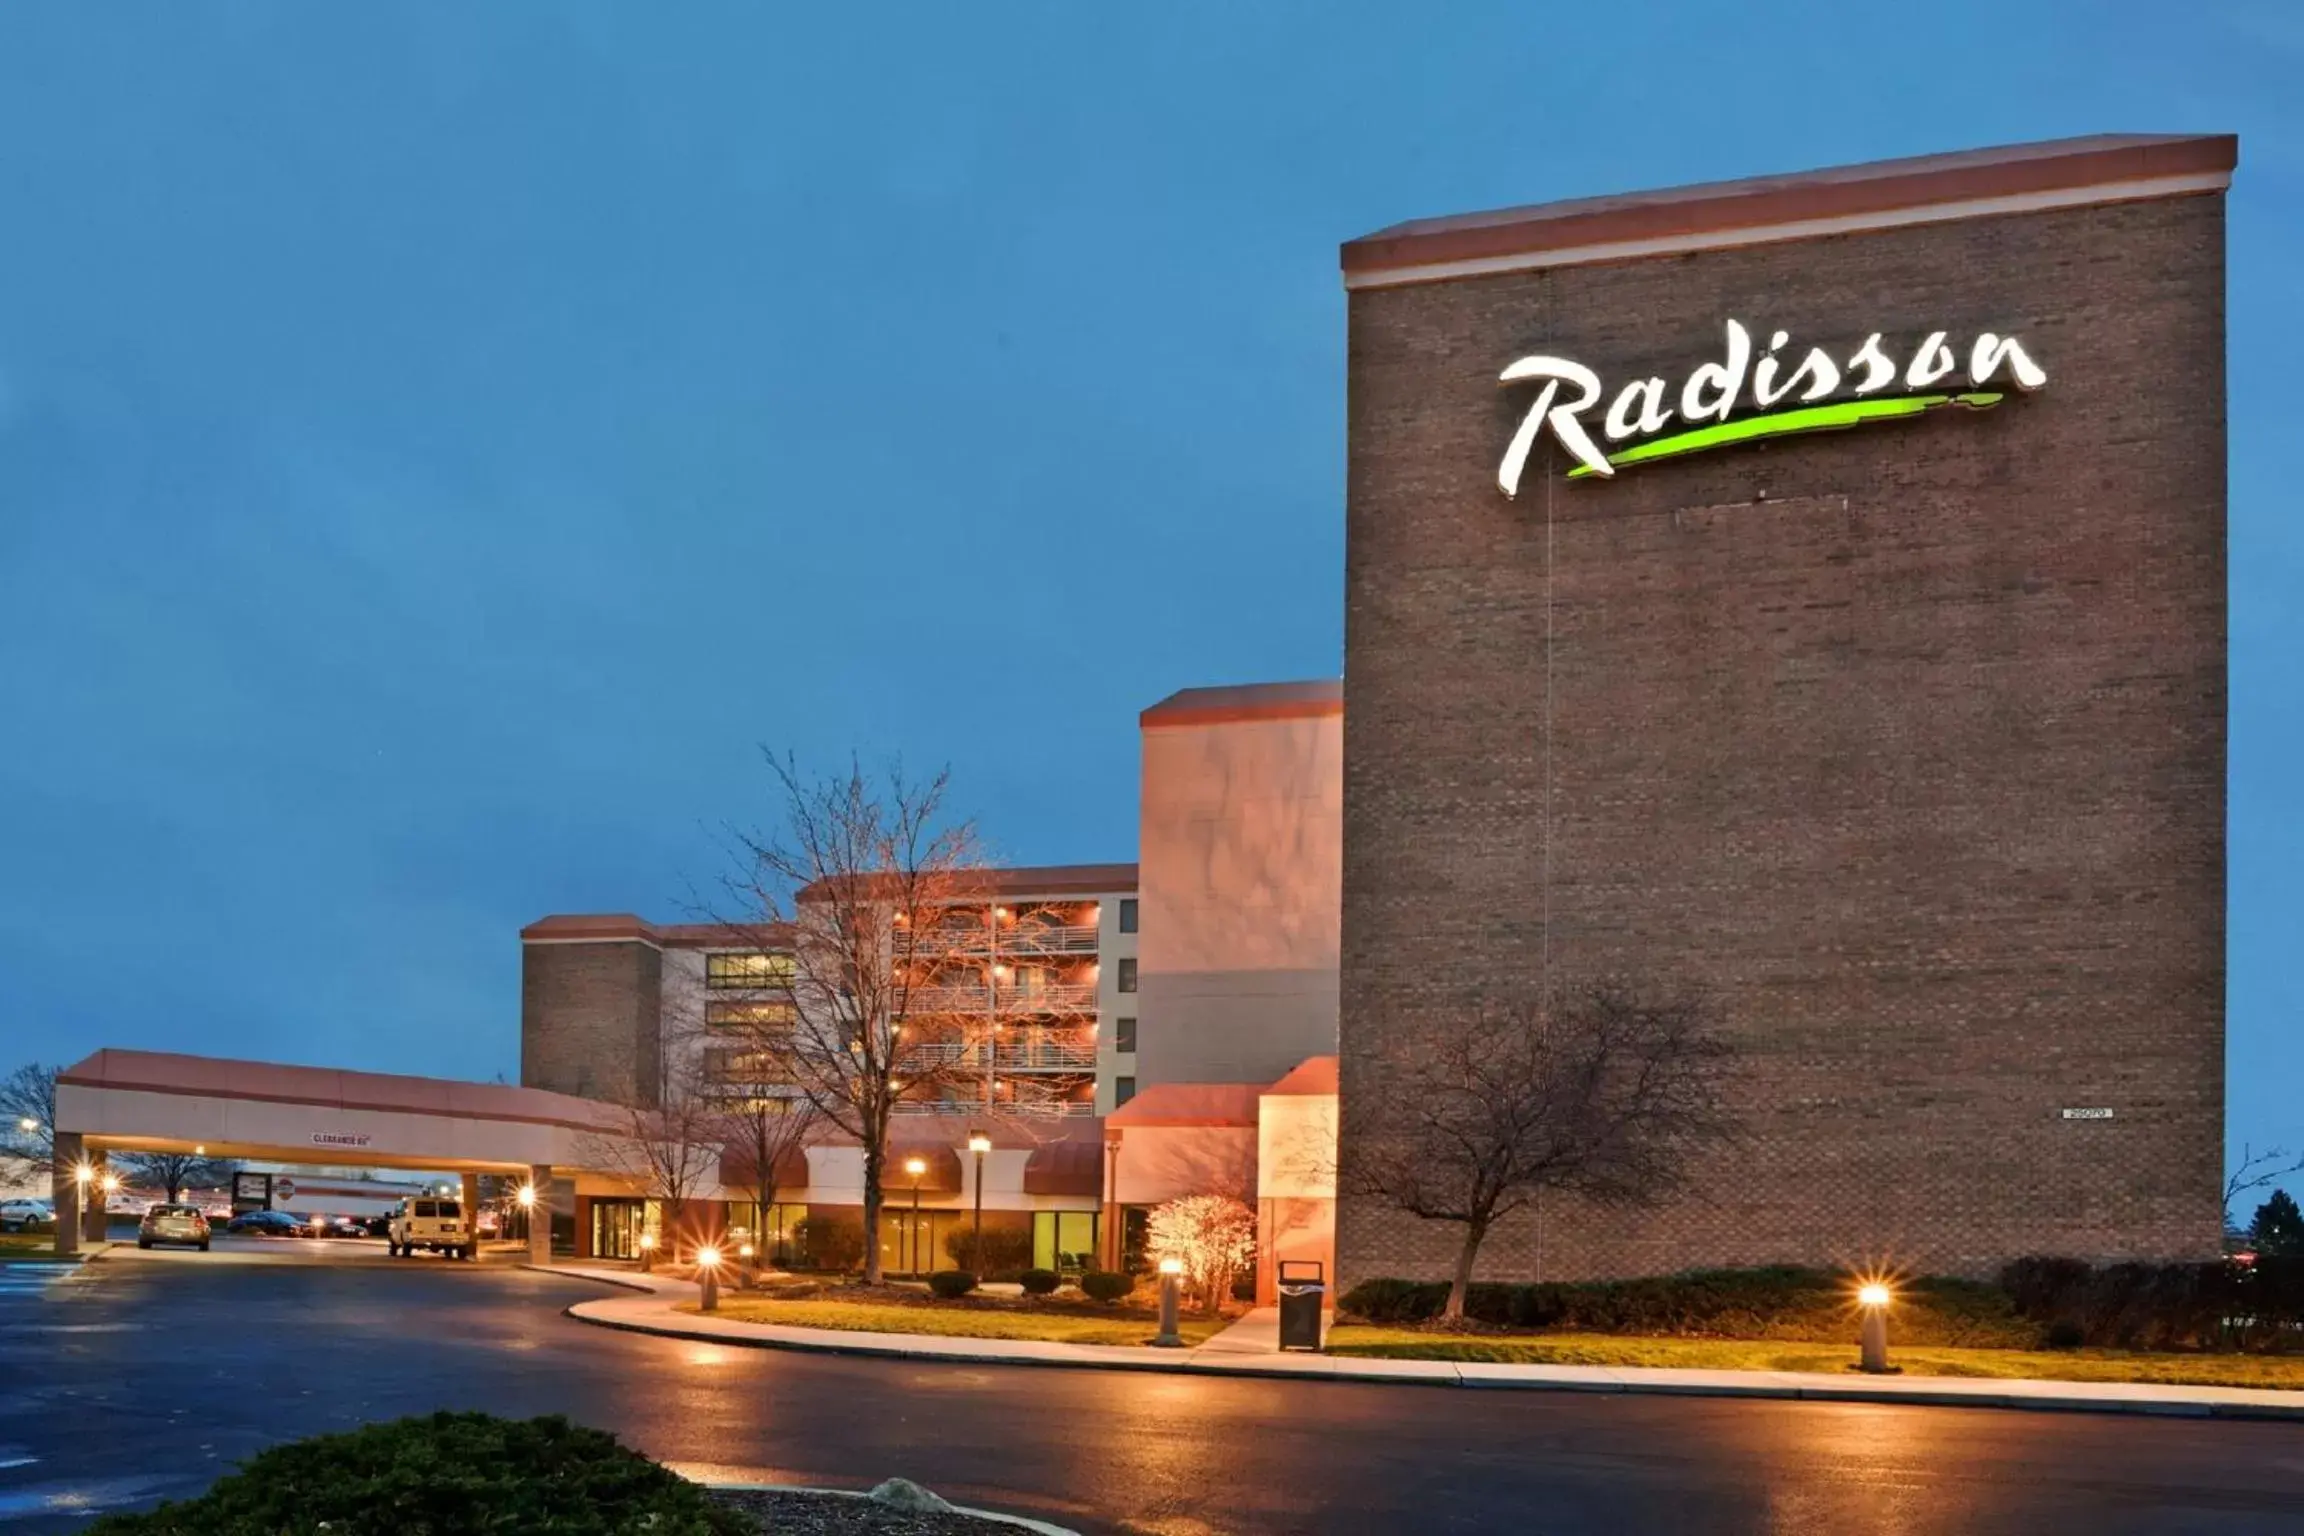 Property Building in Radisson Cleveland Airport